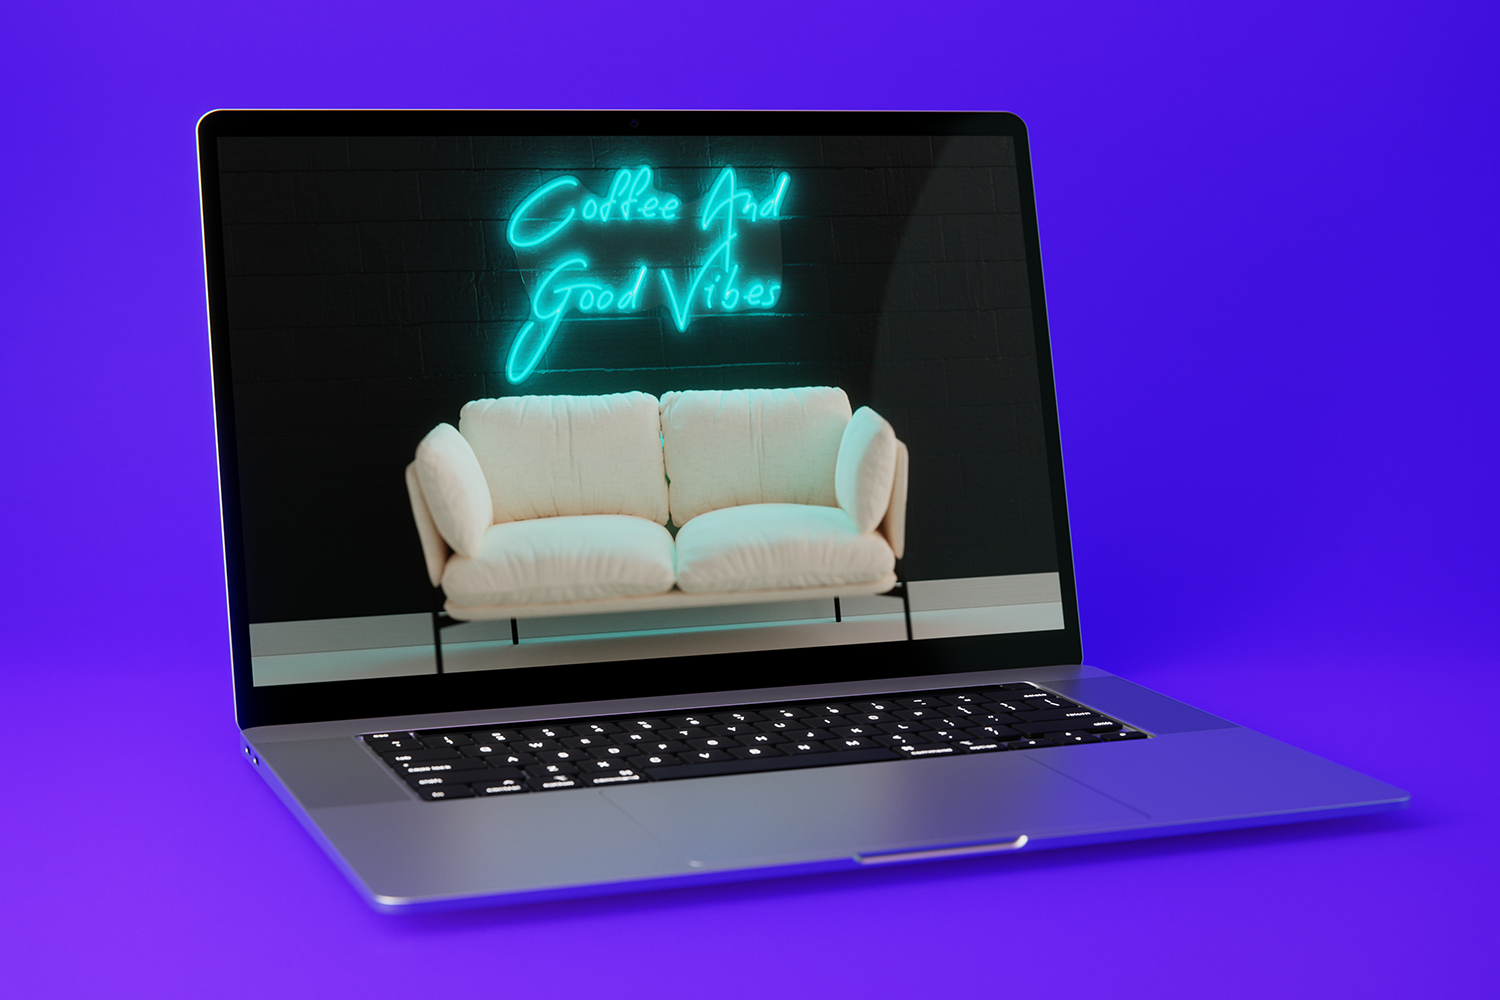 A picture of a laptop showing a 3d rendering of a neon sign